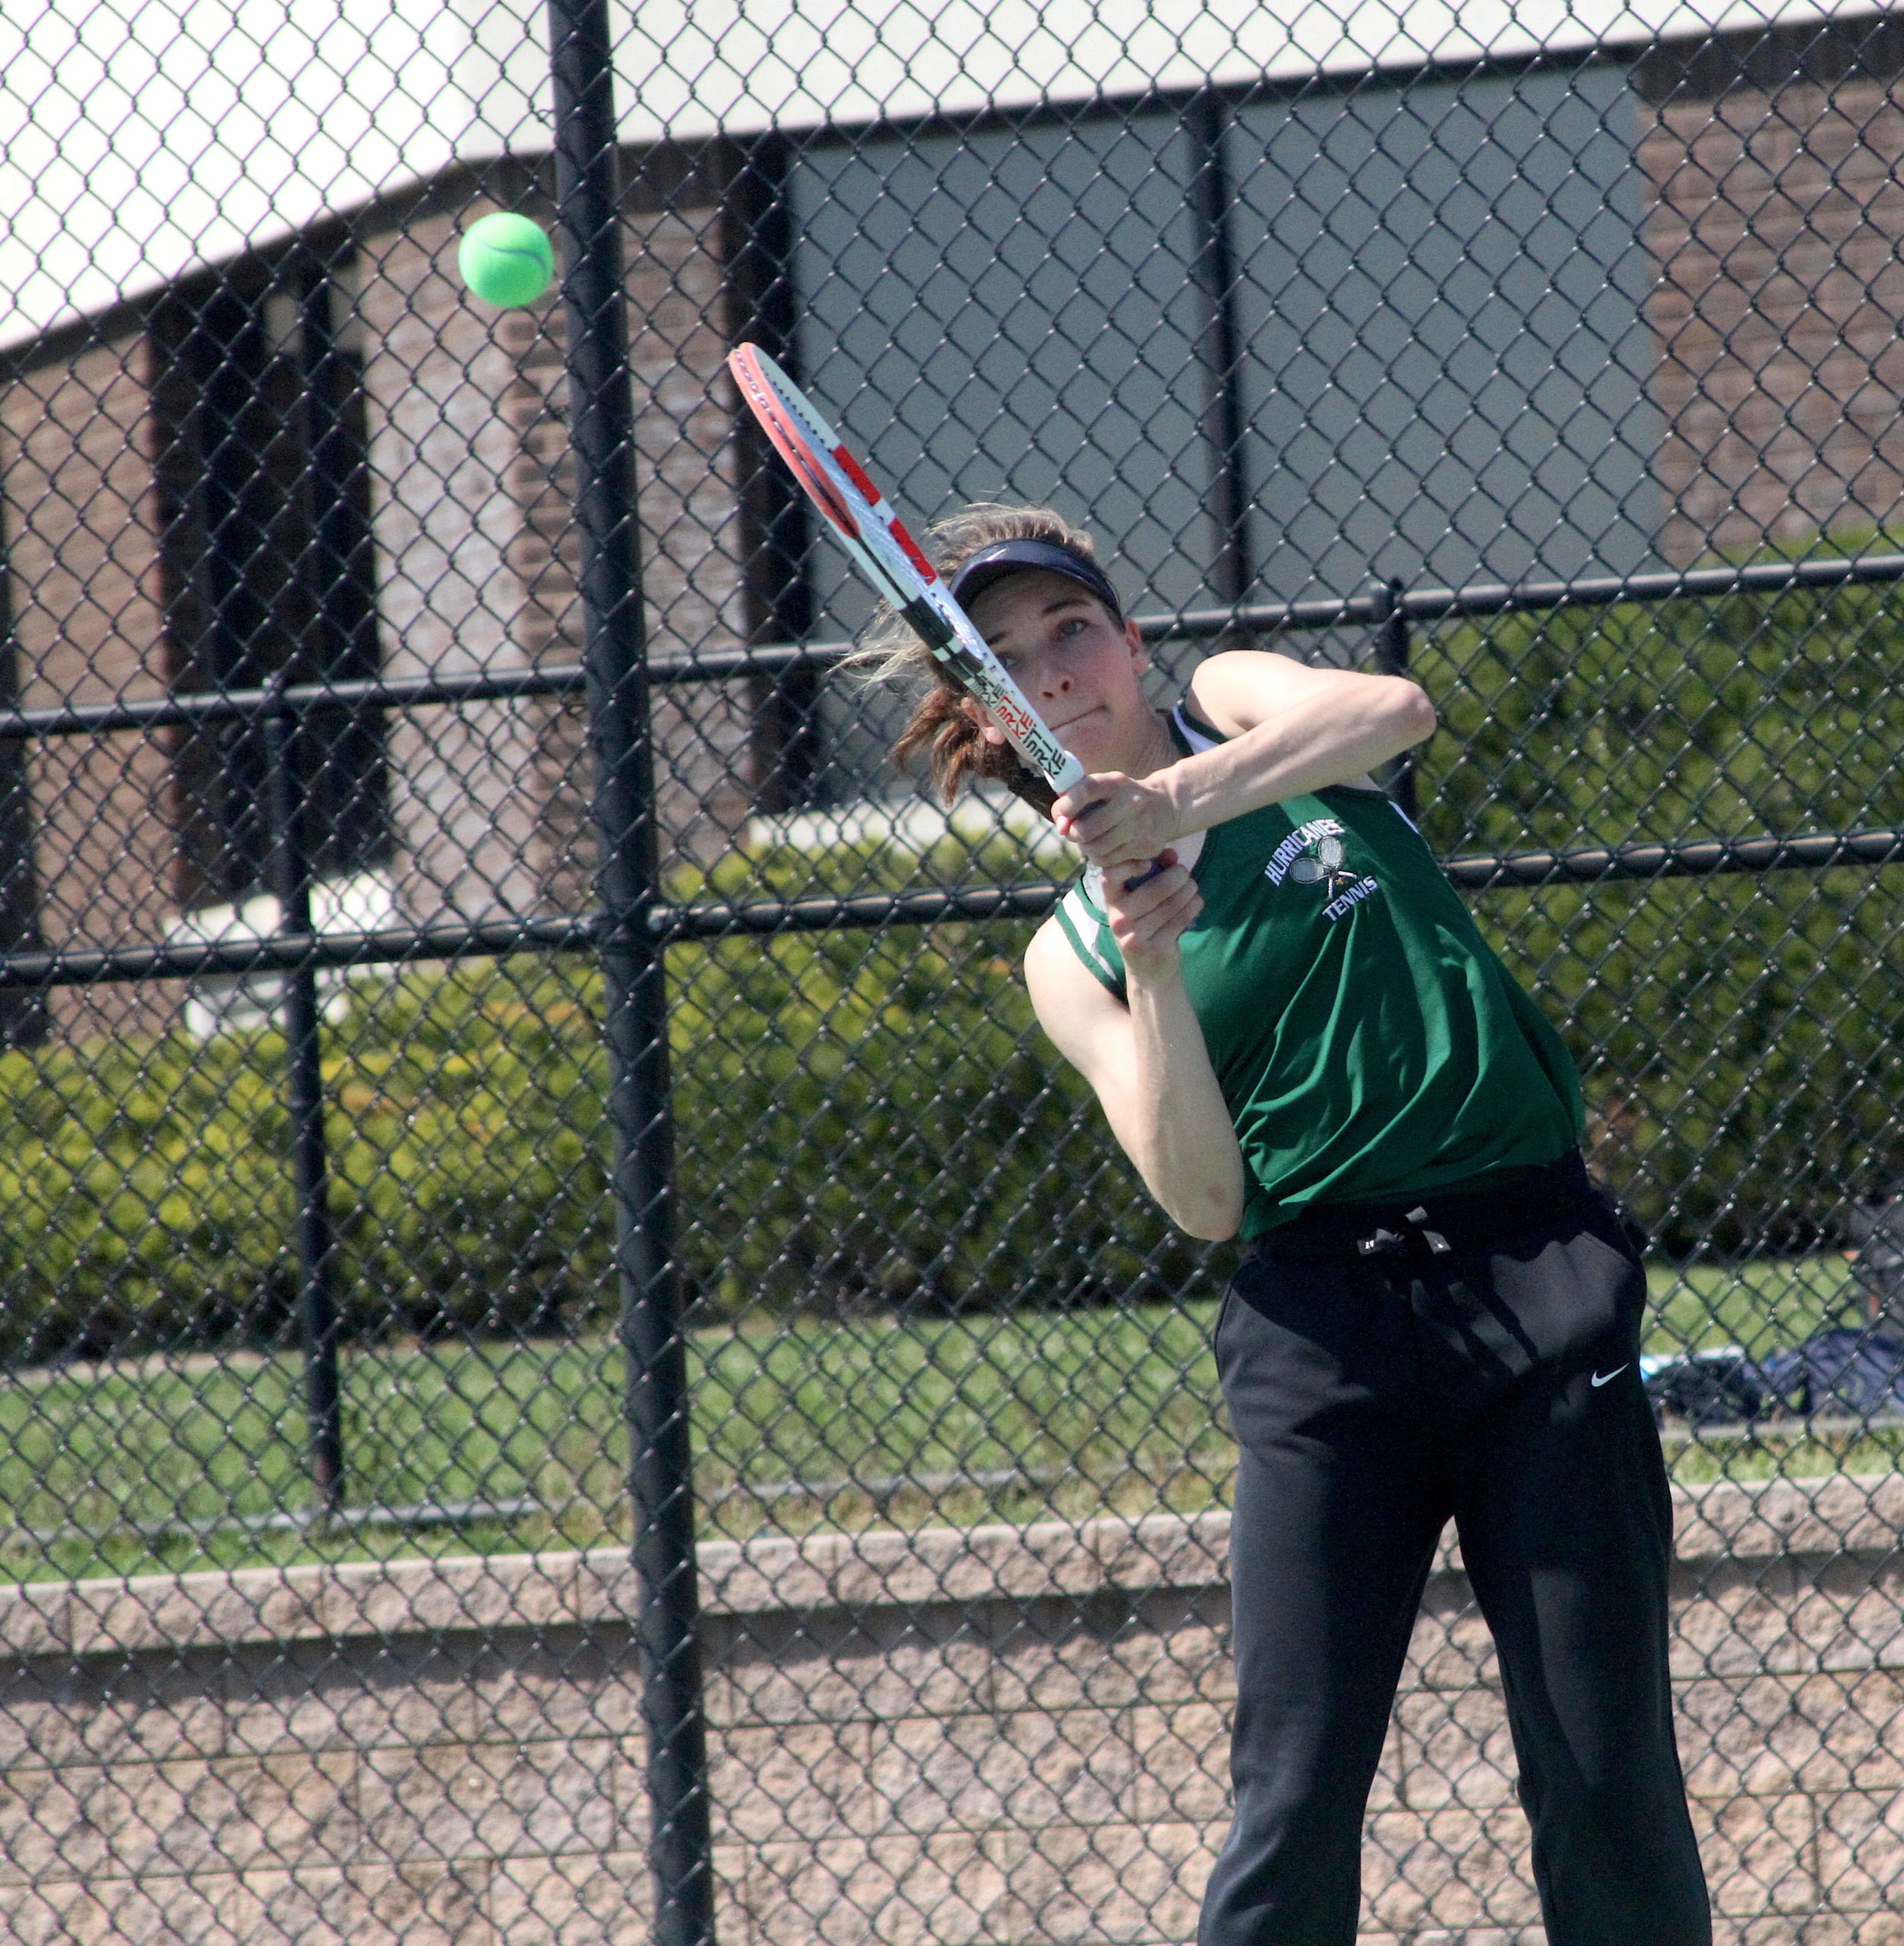 Westhampton Beach junior Rose Hayes was solid at the baseline in the Division IV singles finals.